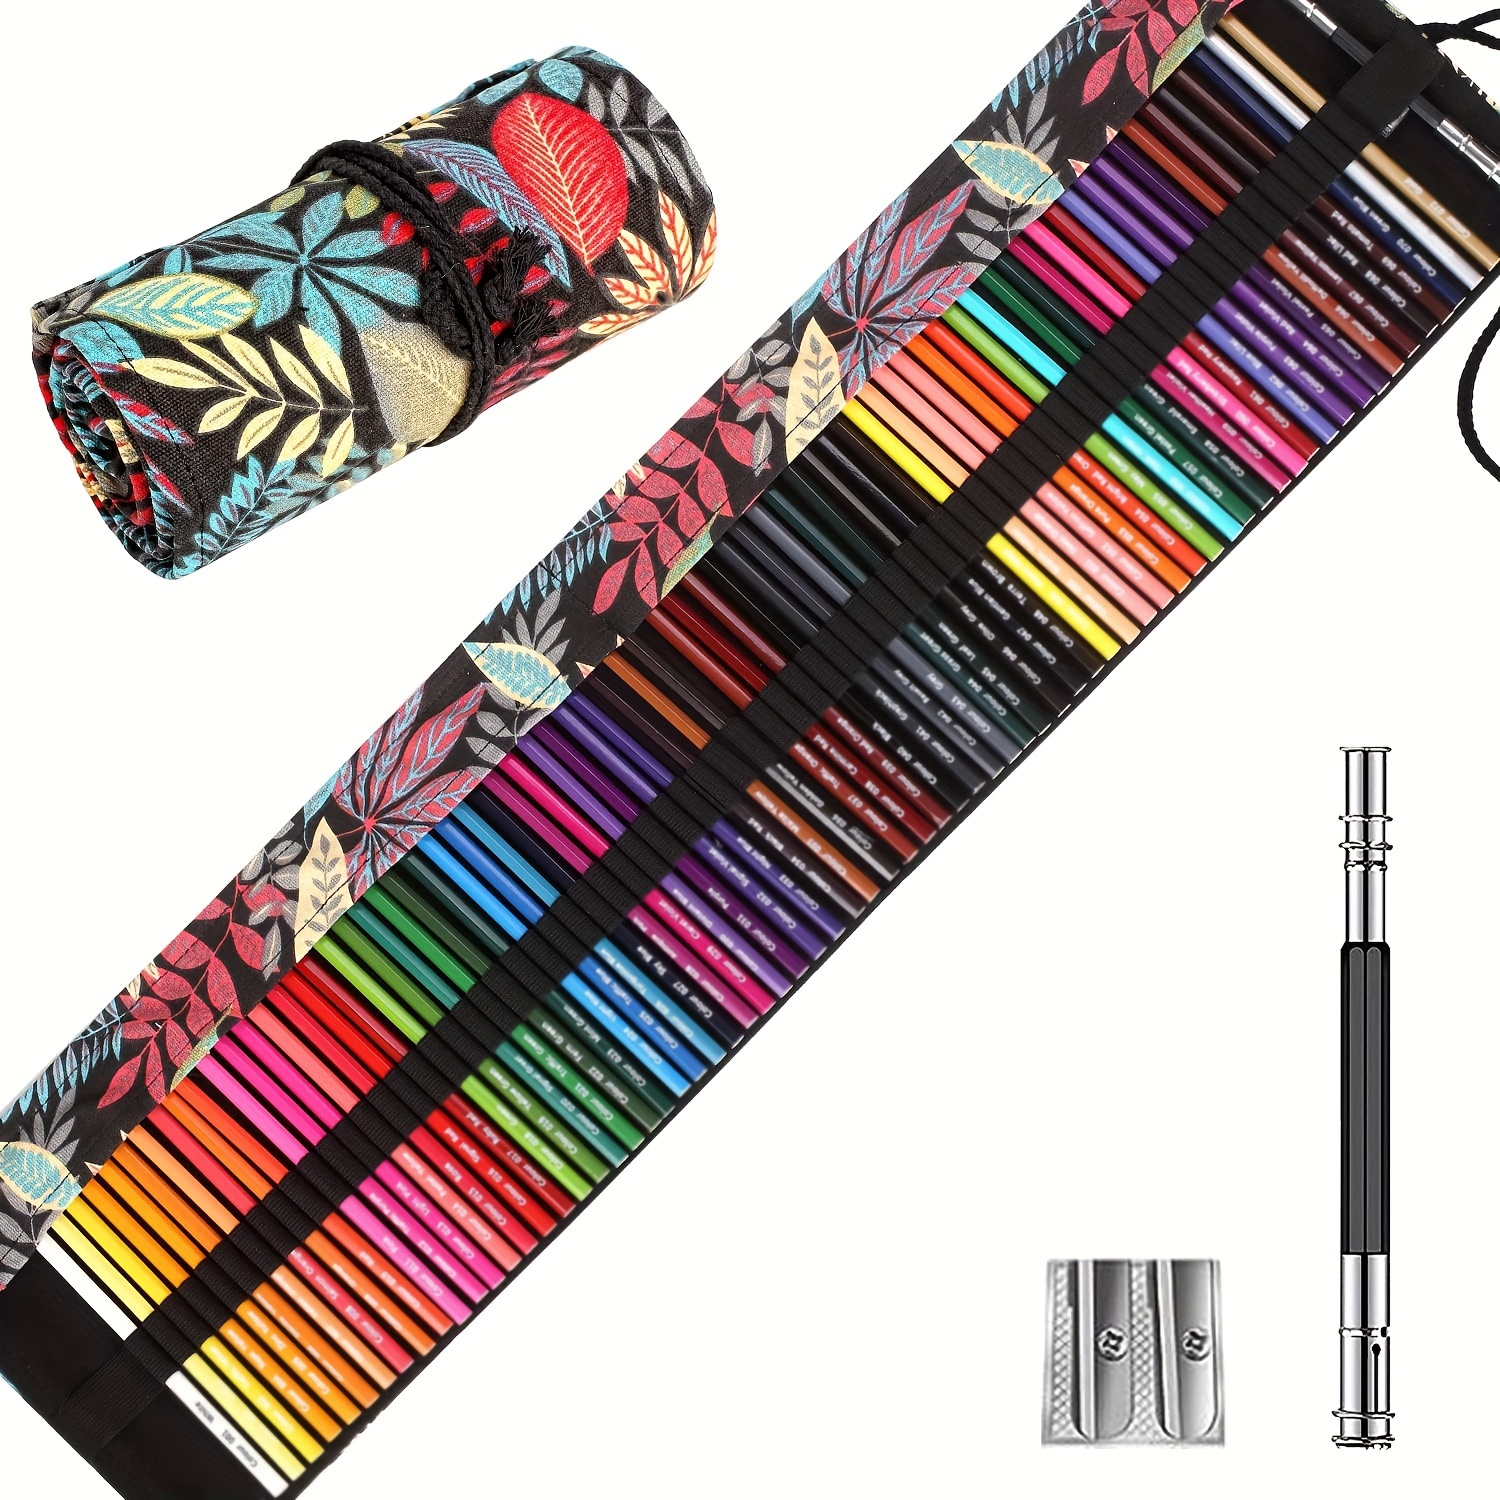  Wifpme 36 Colored Pencils，Quality Coloring Pencils for Adult  Coloring Artists Professionals and Colorists, Soft Core, Sketching Drawing  Pencils Set Art Supplies for Kid Beginners : Arts, Crafts & Sewing